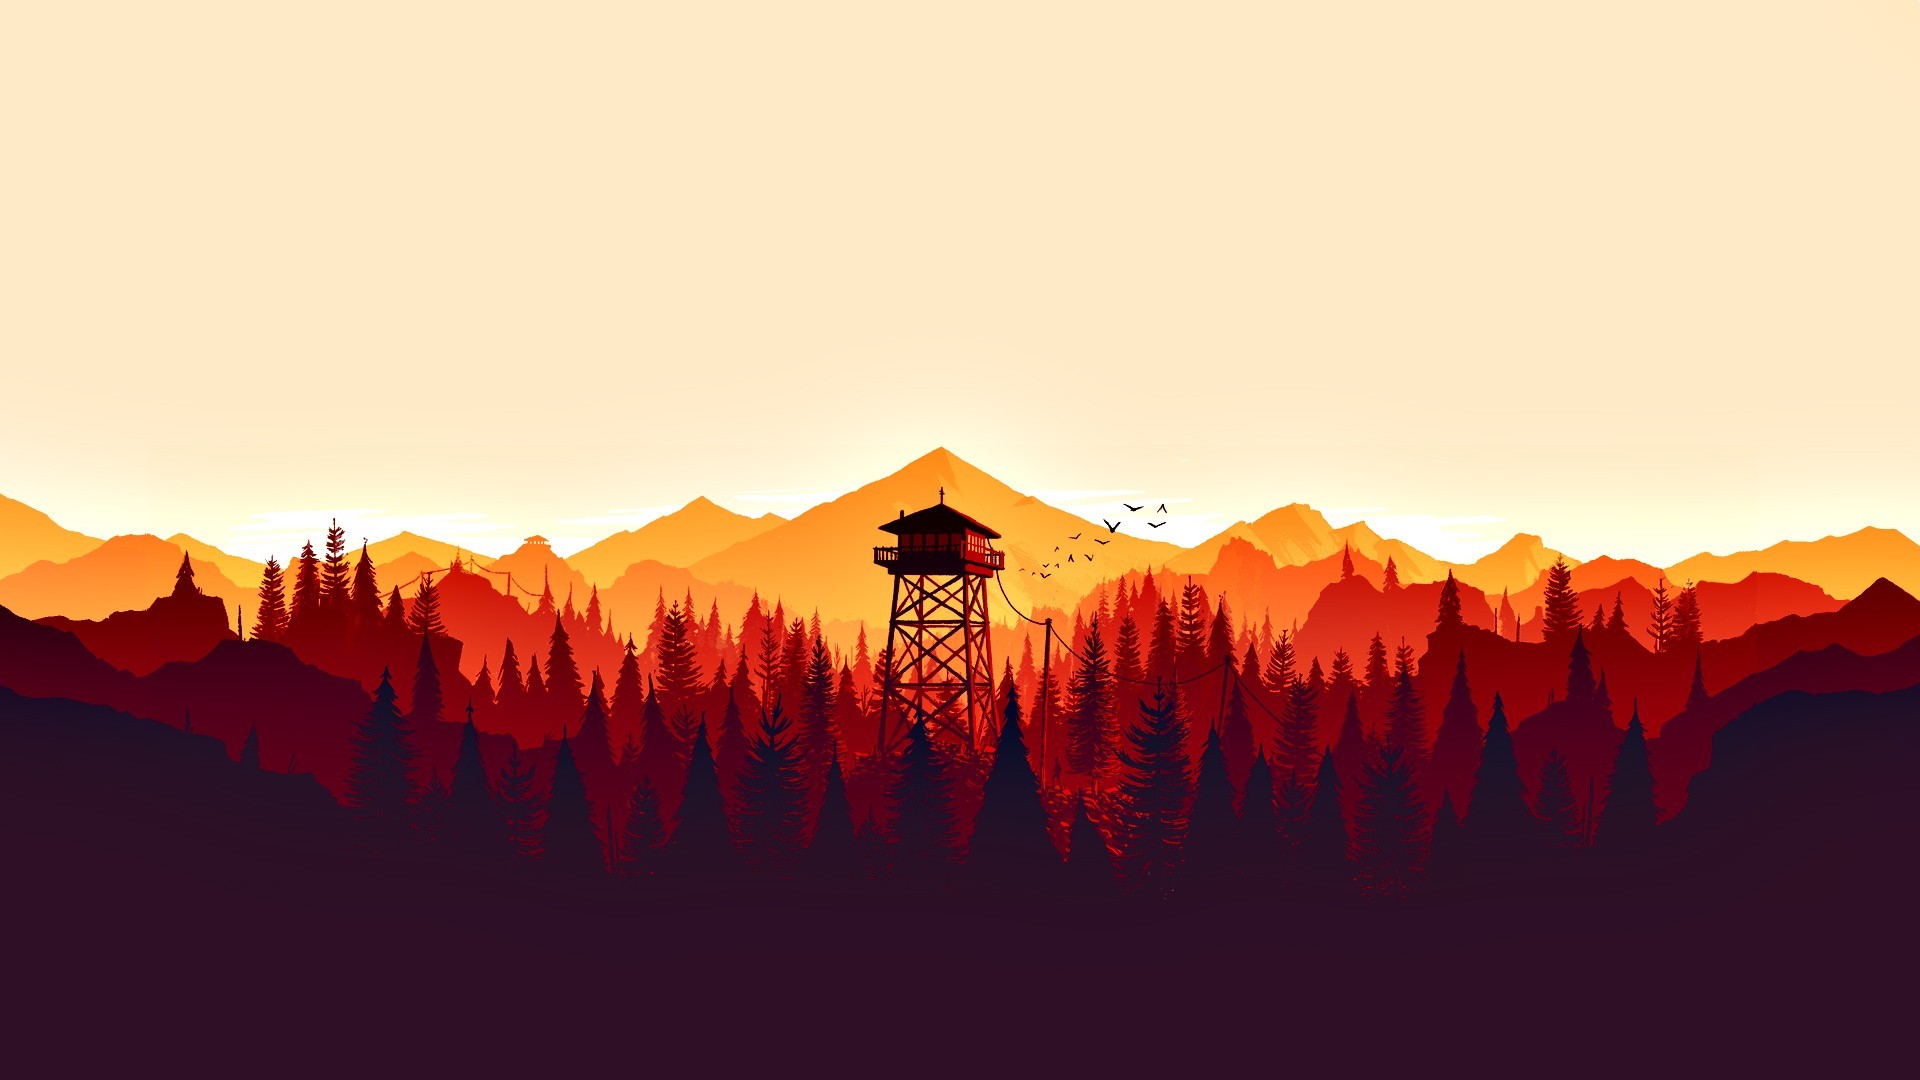 Firewatch Wallpaper Night Blue | Quotes and Wallpaper B